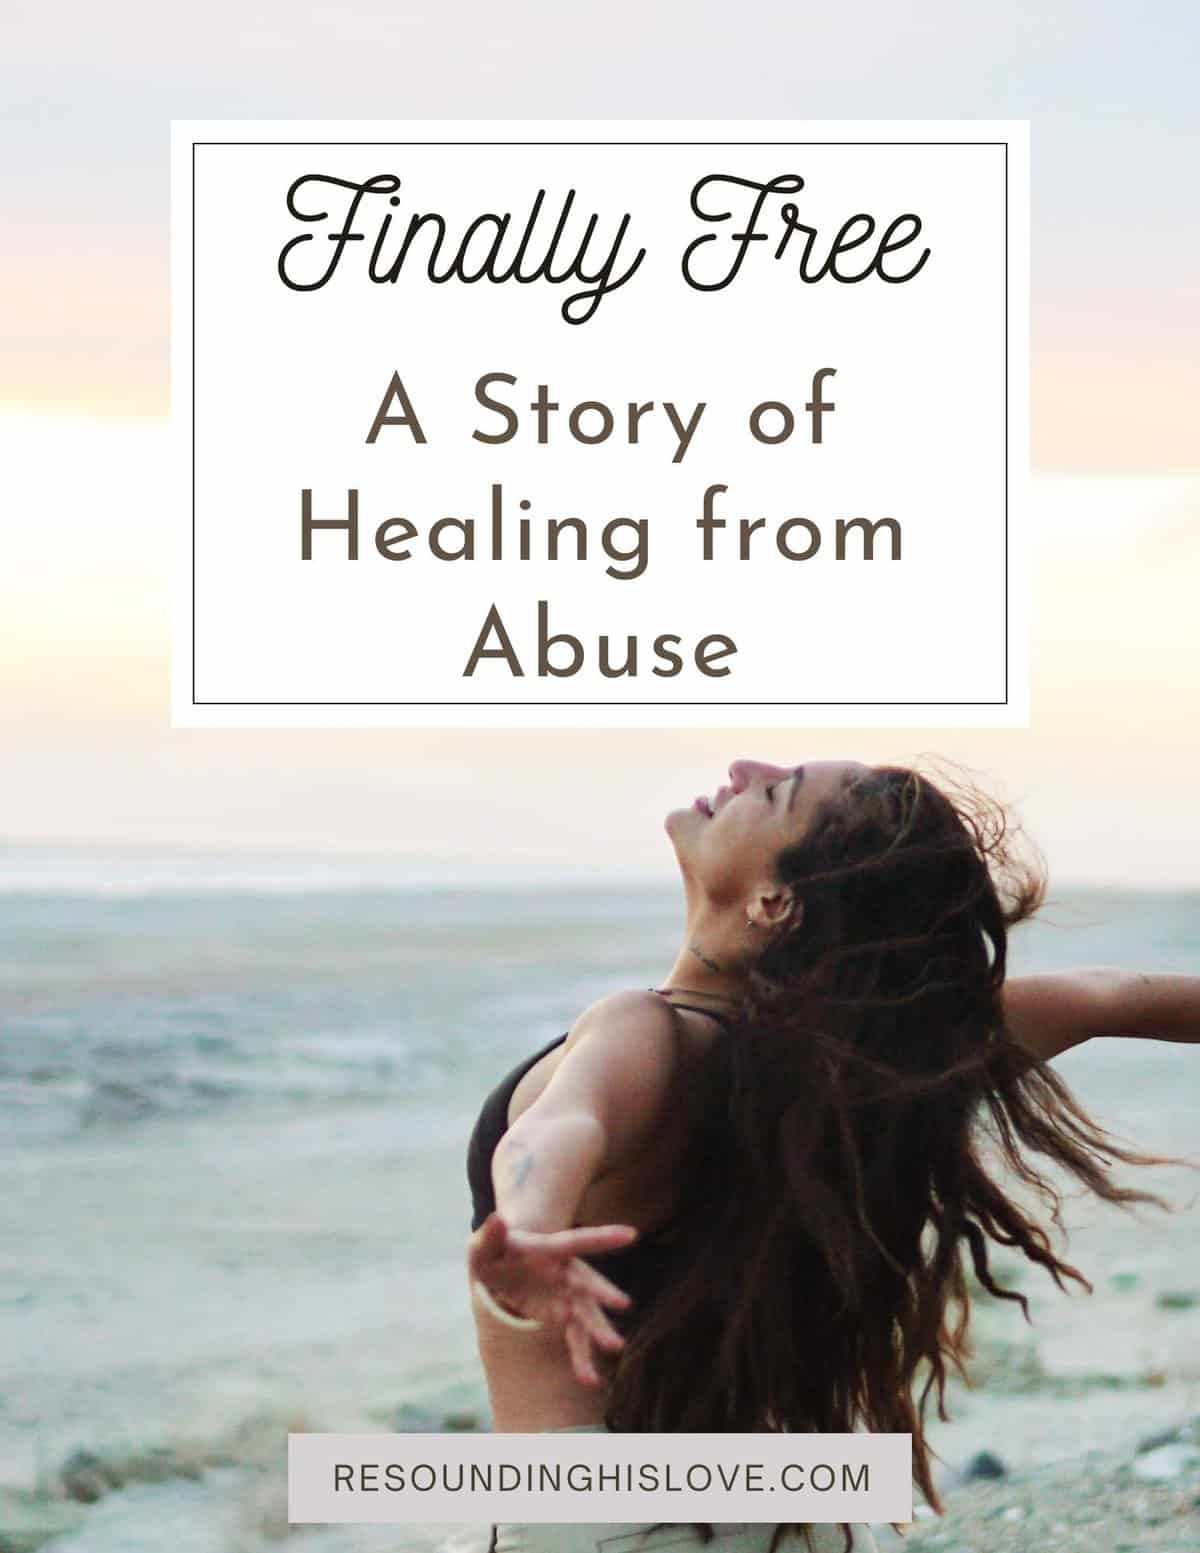 MY PERSONAL STORY ON ABUSE
Finally FREE: A Story of Healing from Abuse